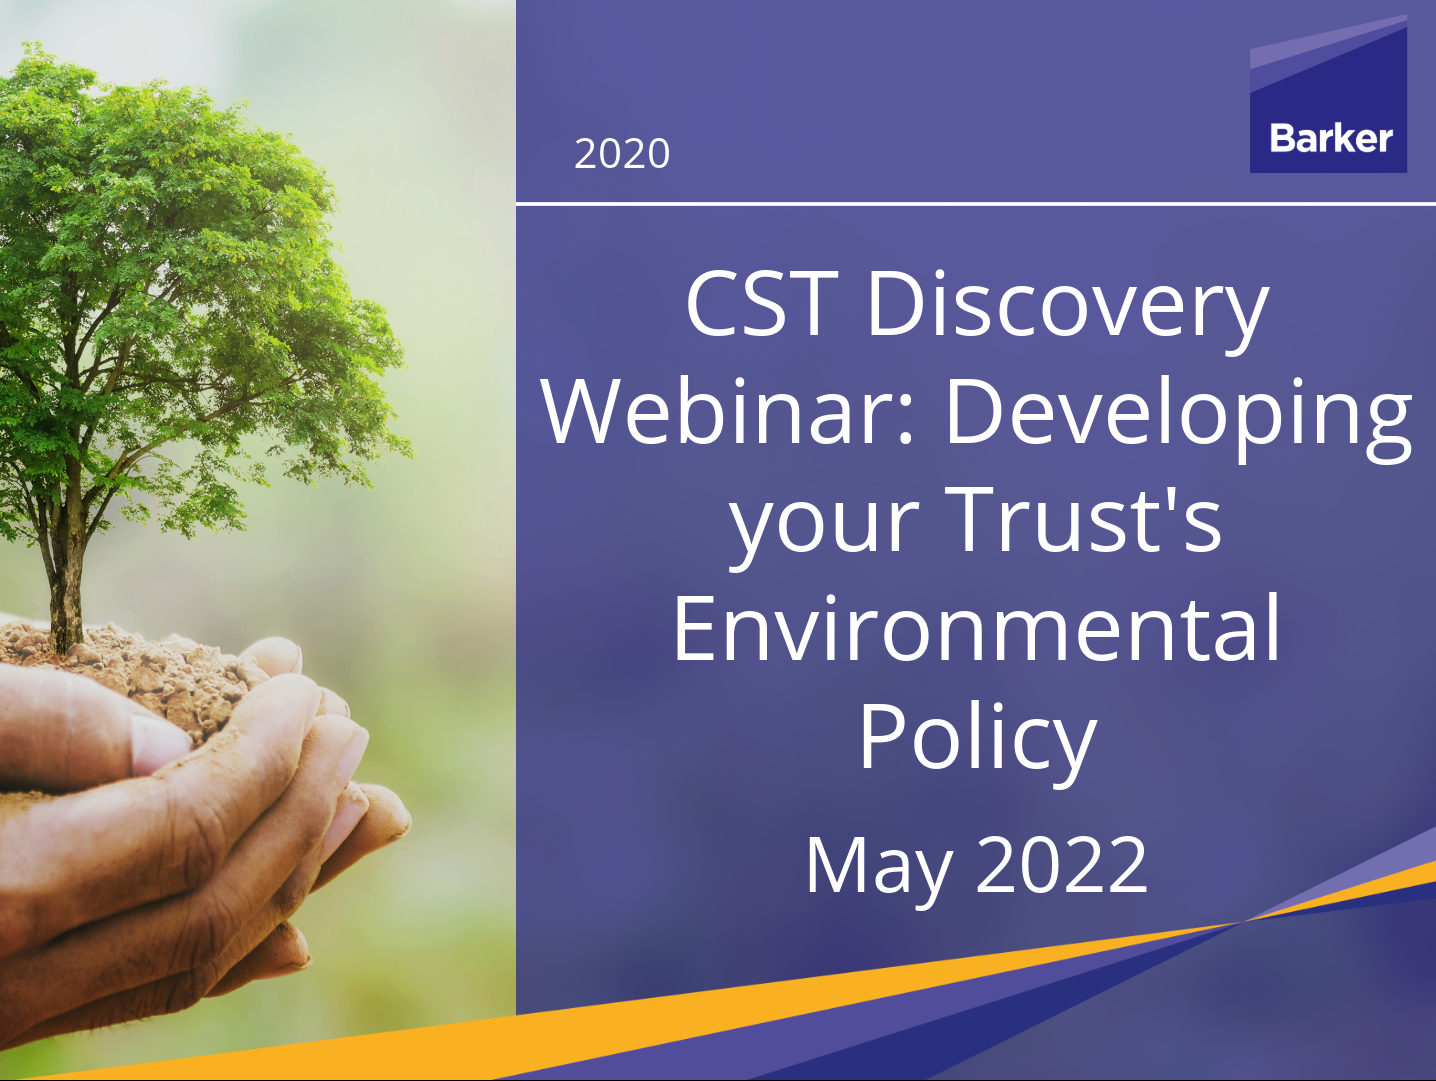 CST Discovery Webinar: Developing your Trust’s Environmental Policy